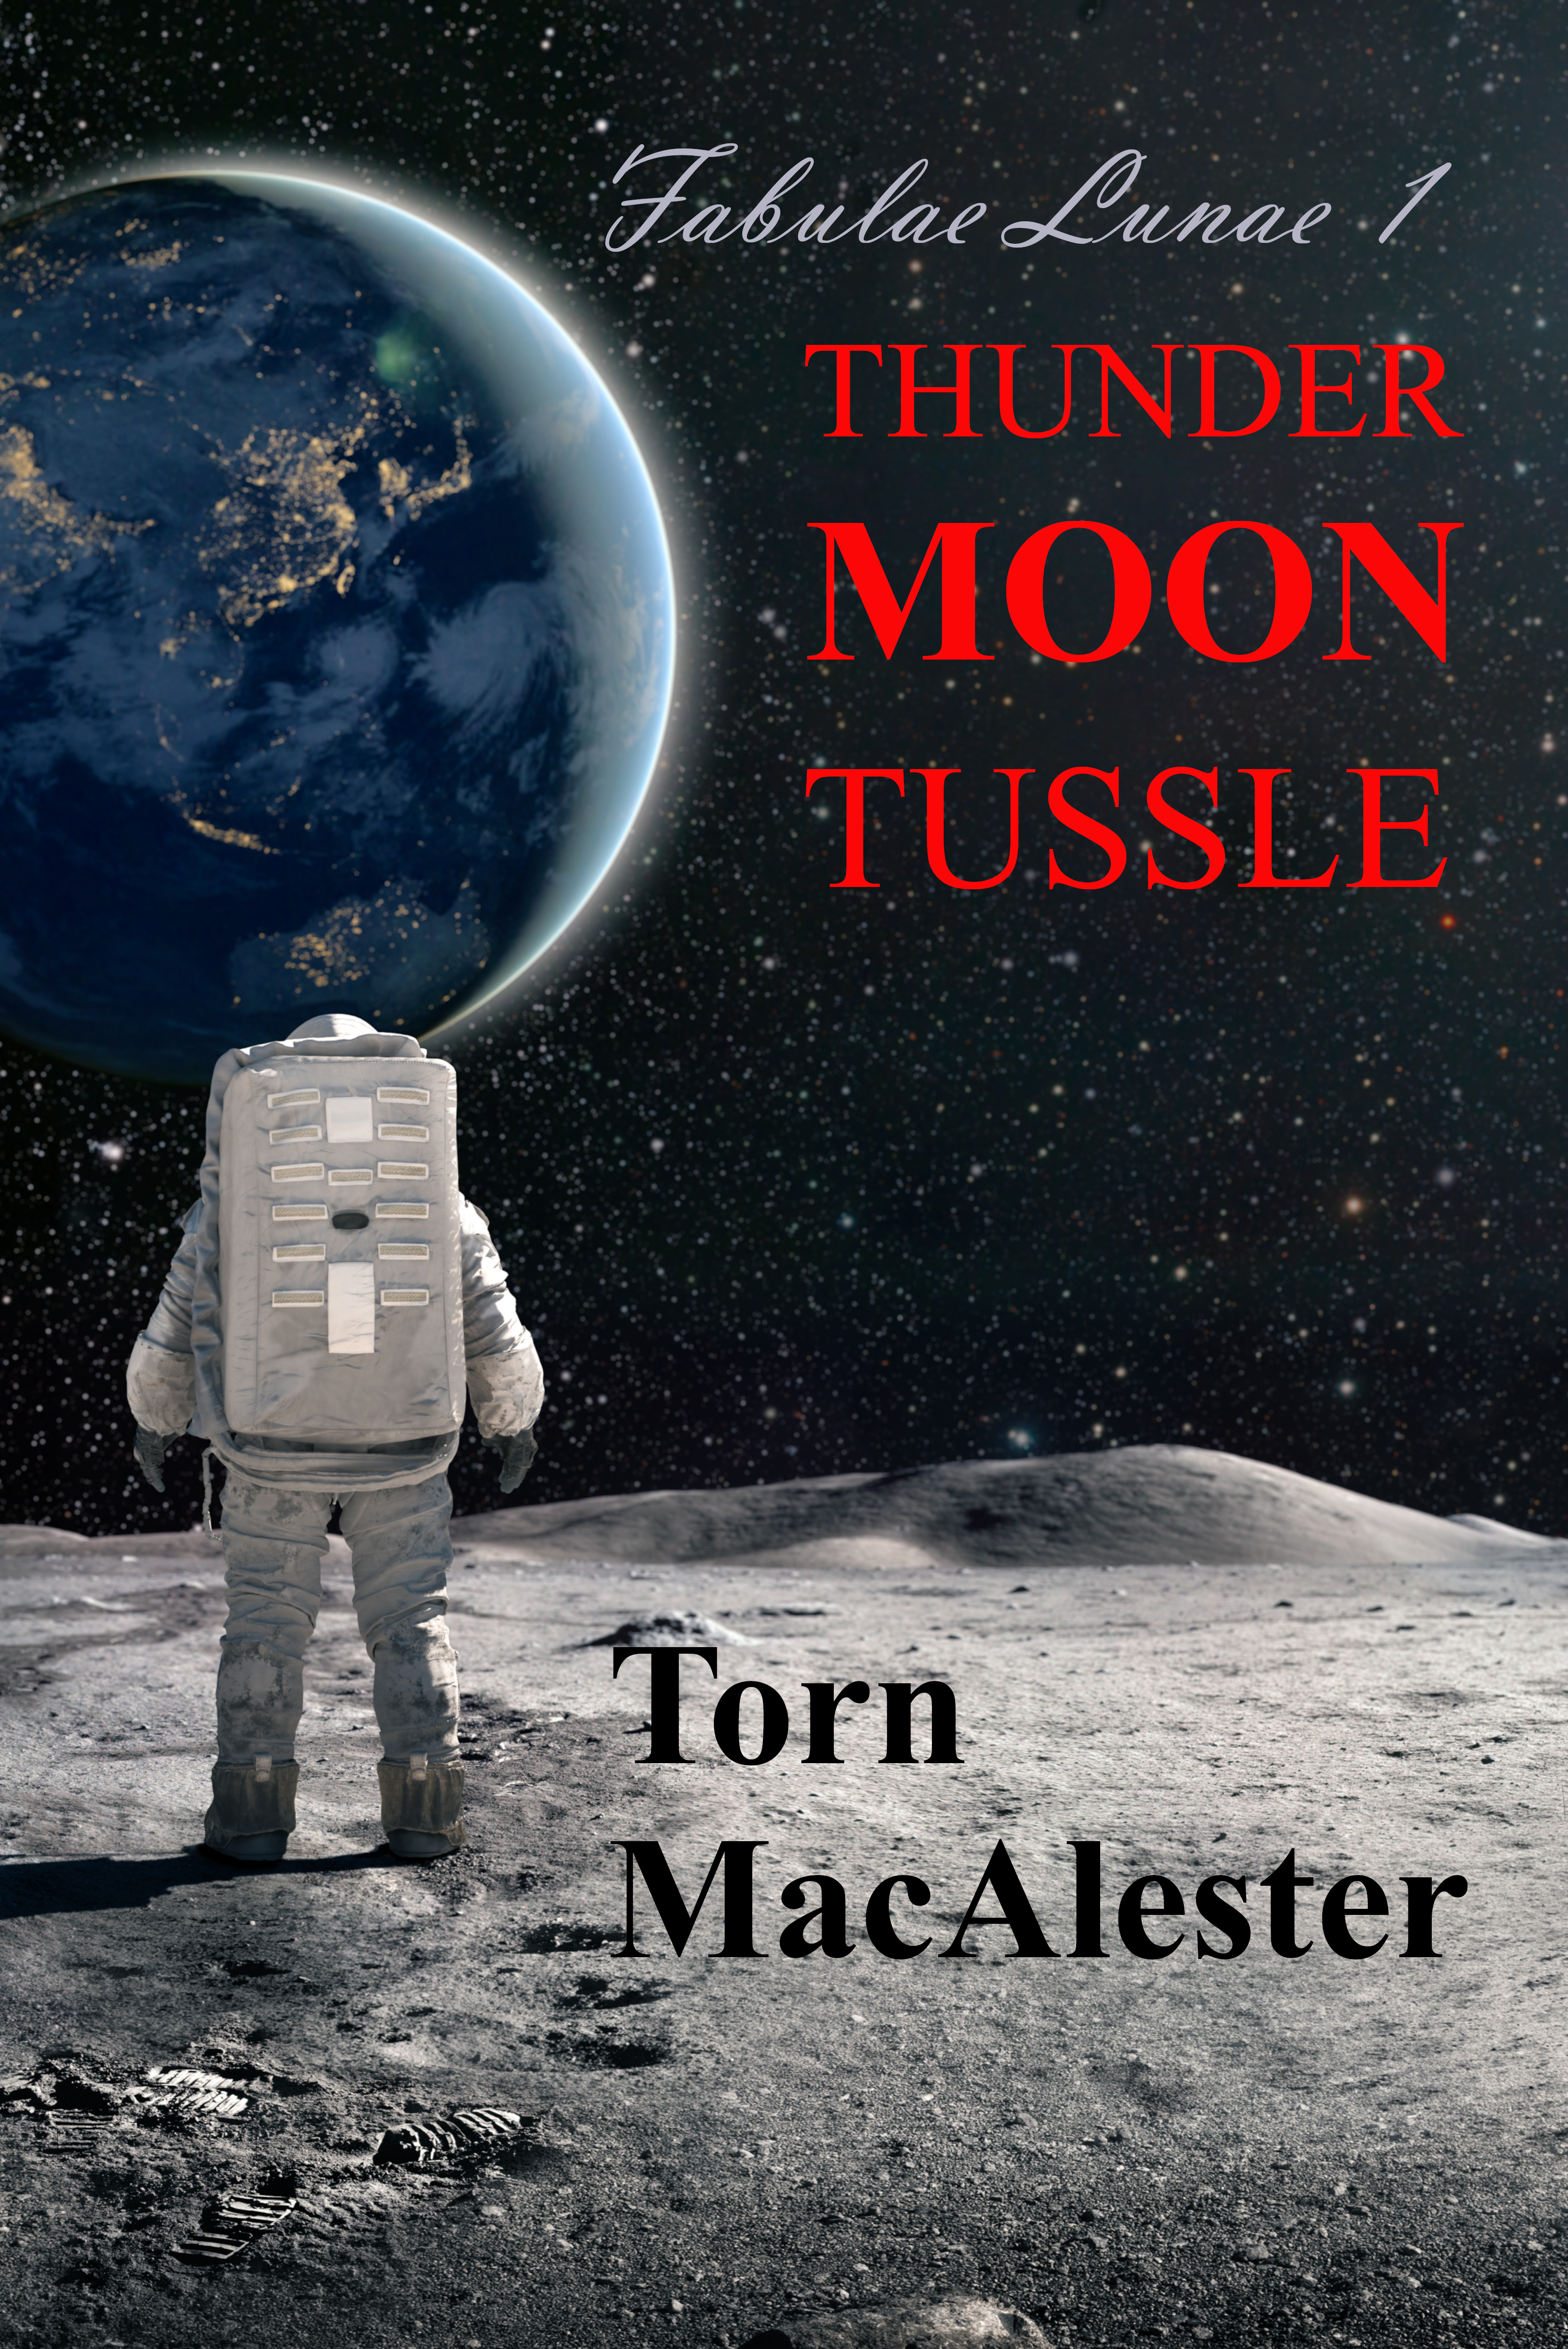 Thunder Moon Tussle: A Near Future Science Fiction Novel by Torn MacAlester